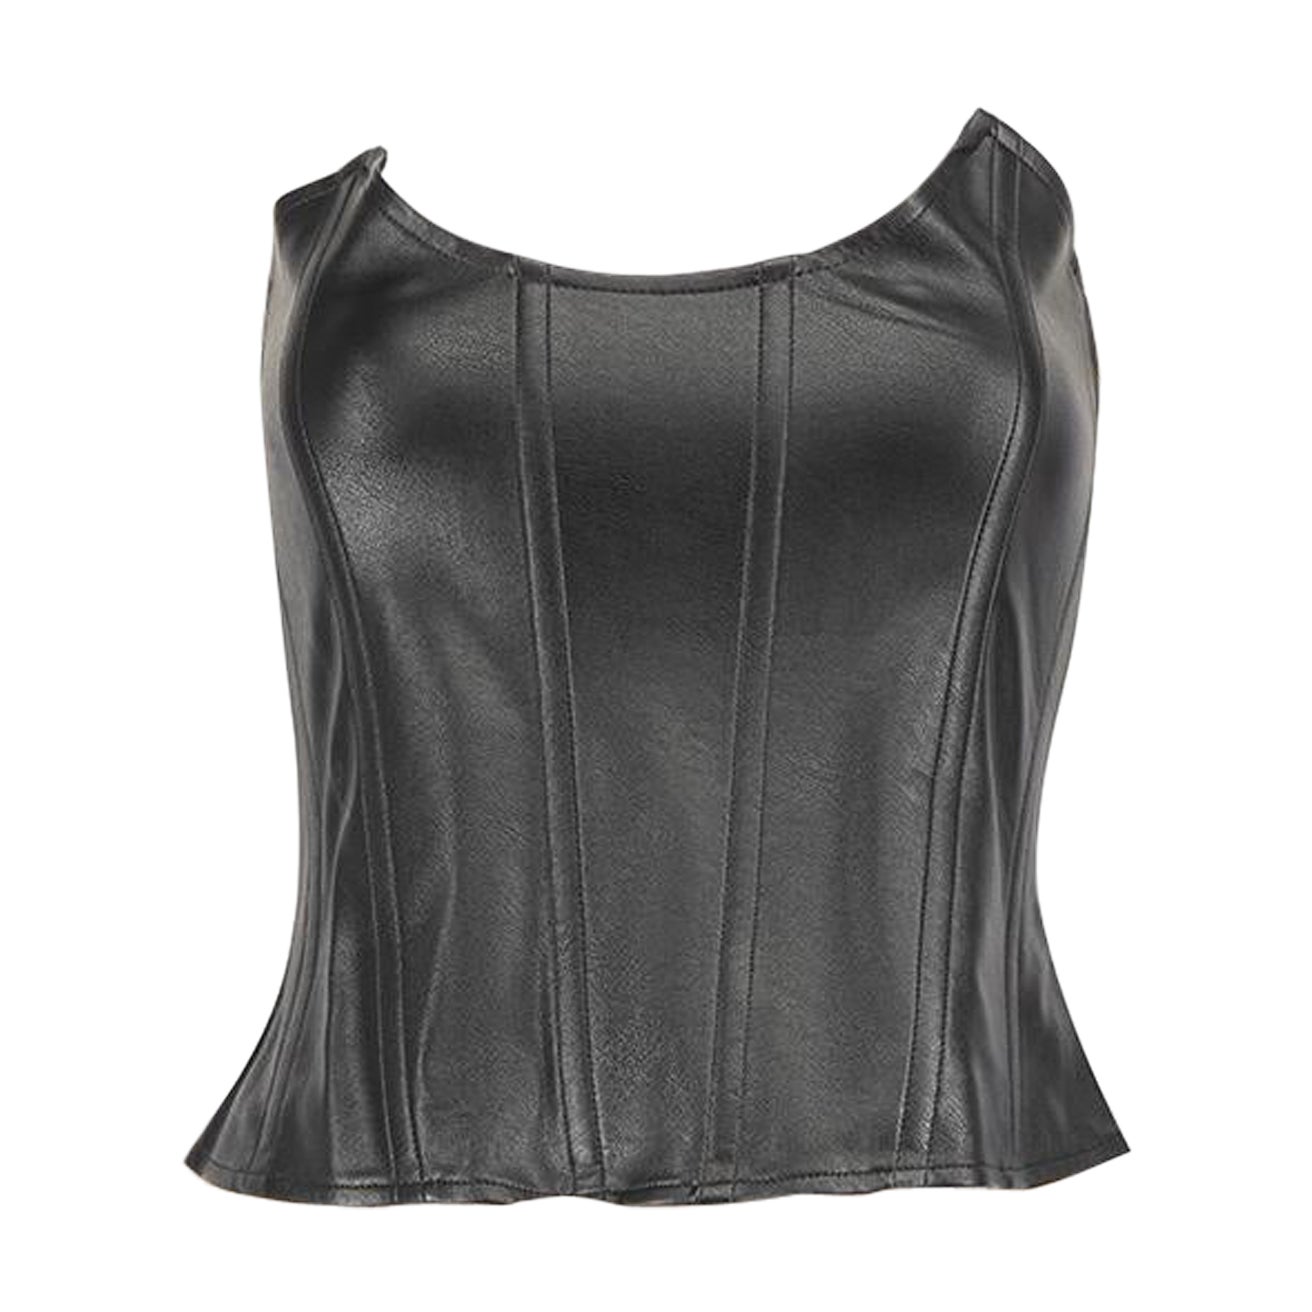 Miaou Black Vegan Leather Strapless Corset Top Size S For Sale